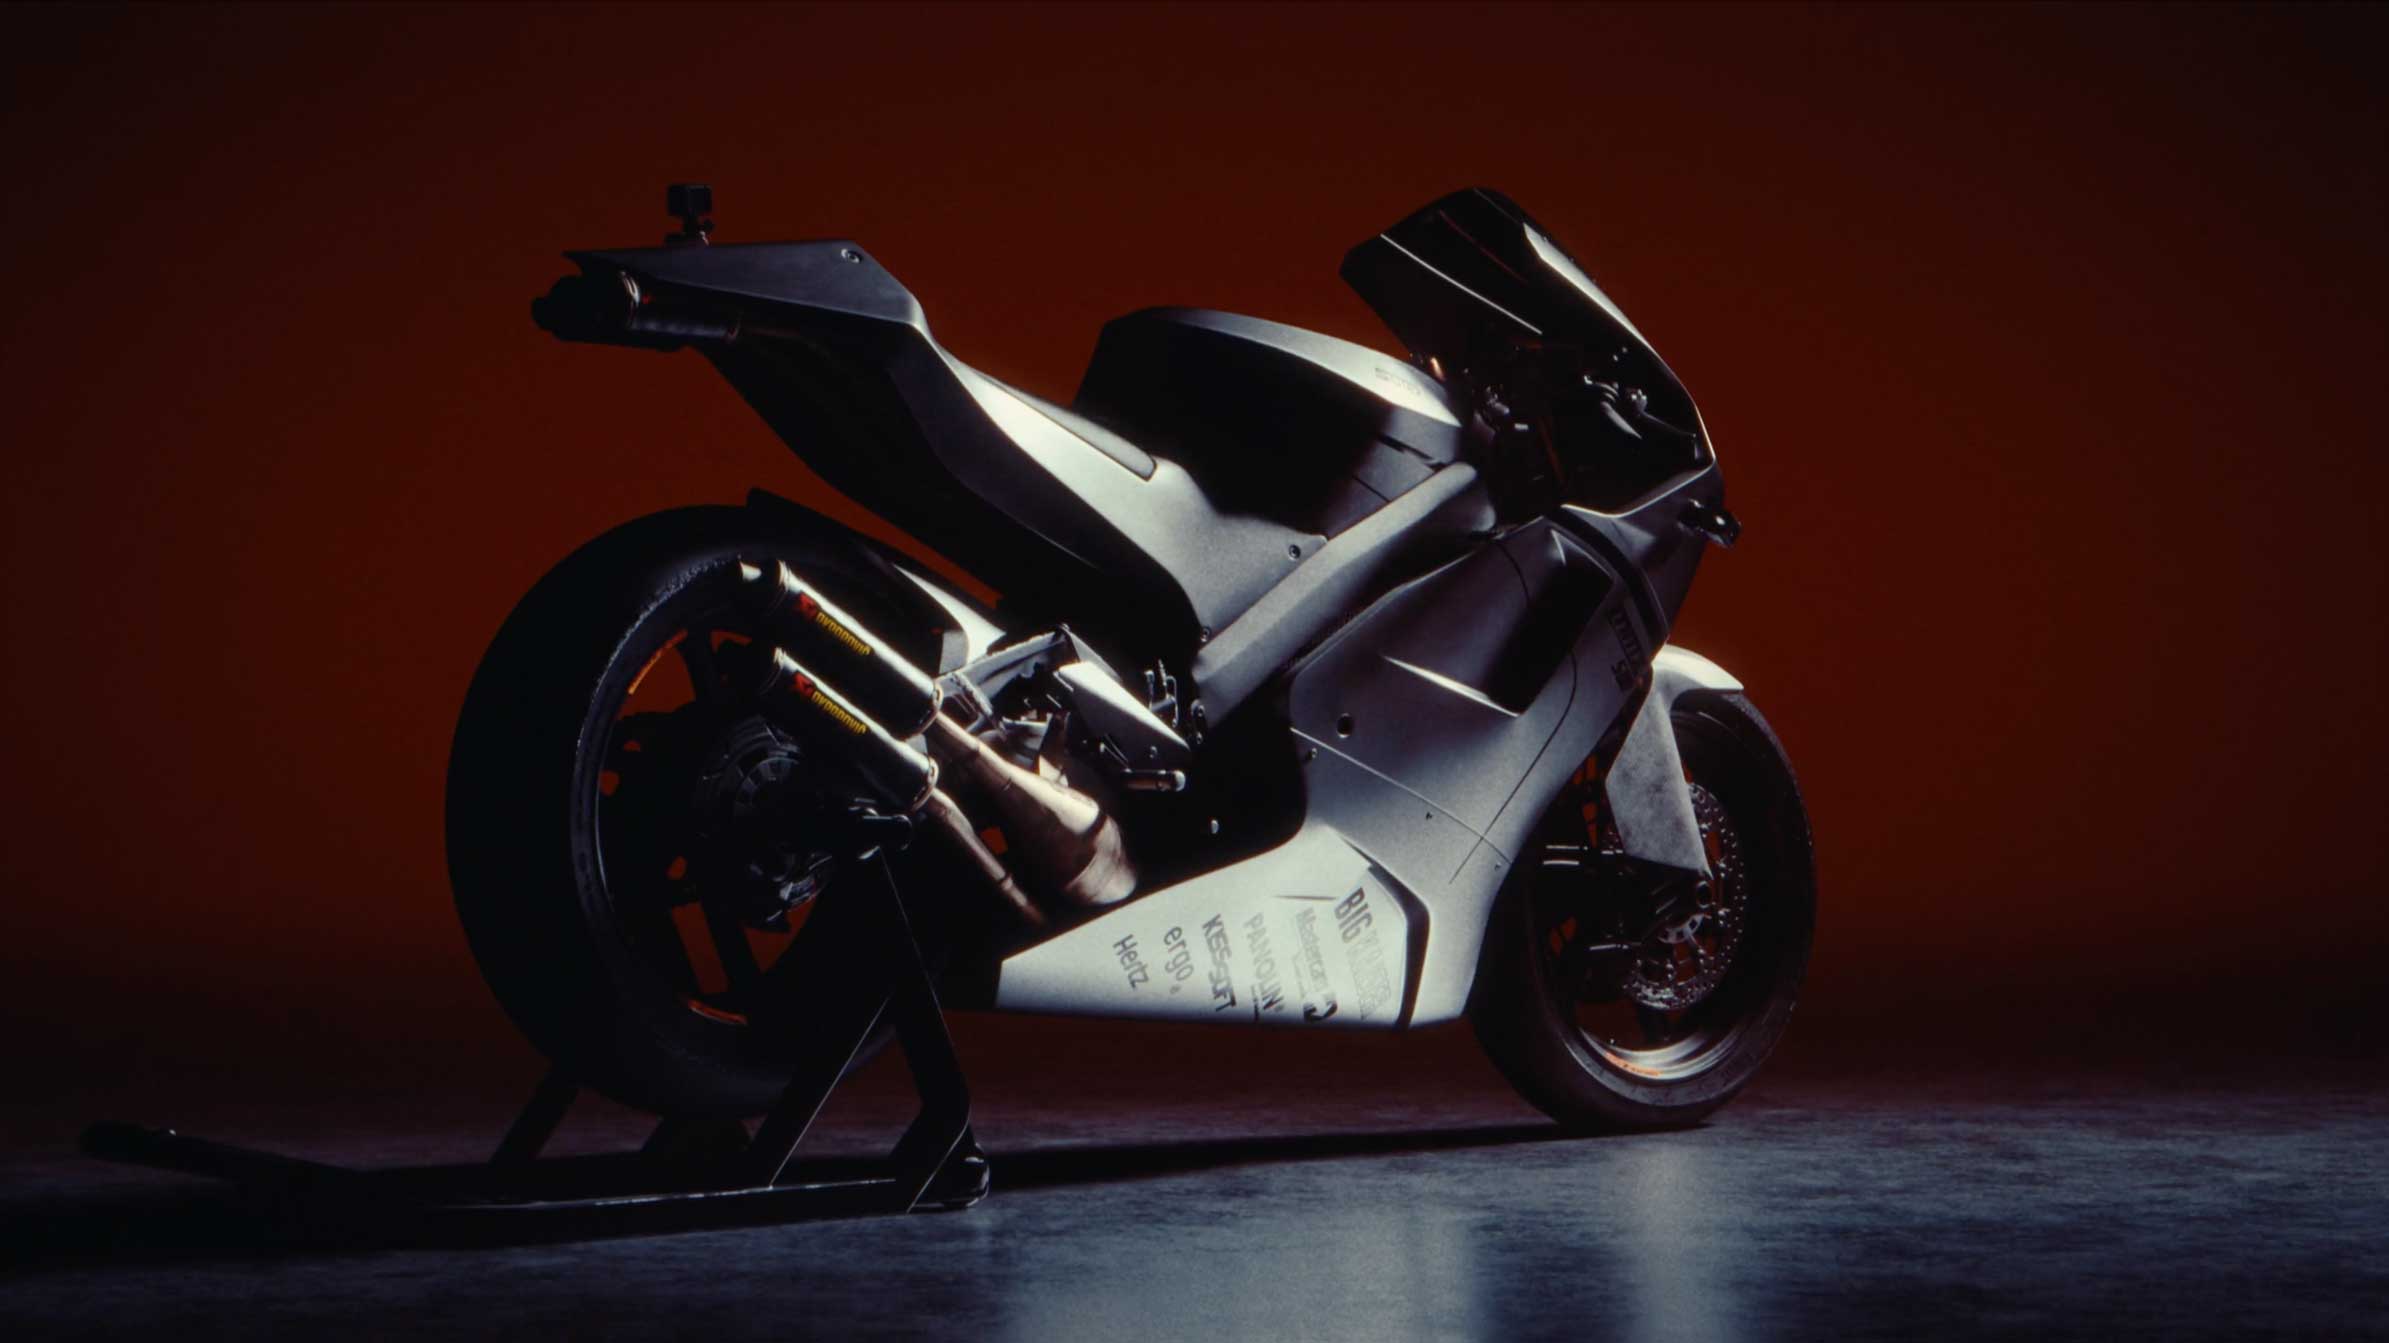 Suter MMX500 Racing Bike product film by Stance | STASH MAGAZINE